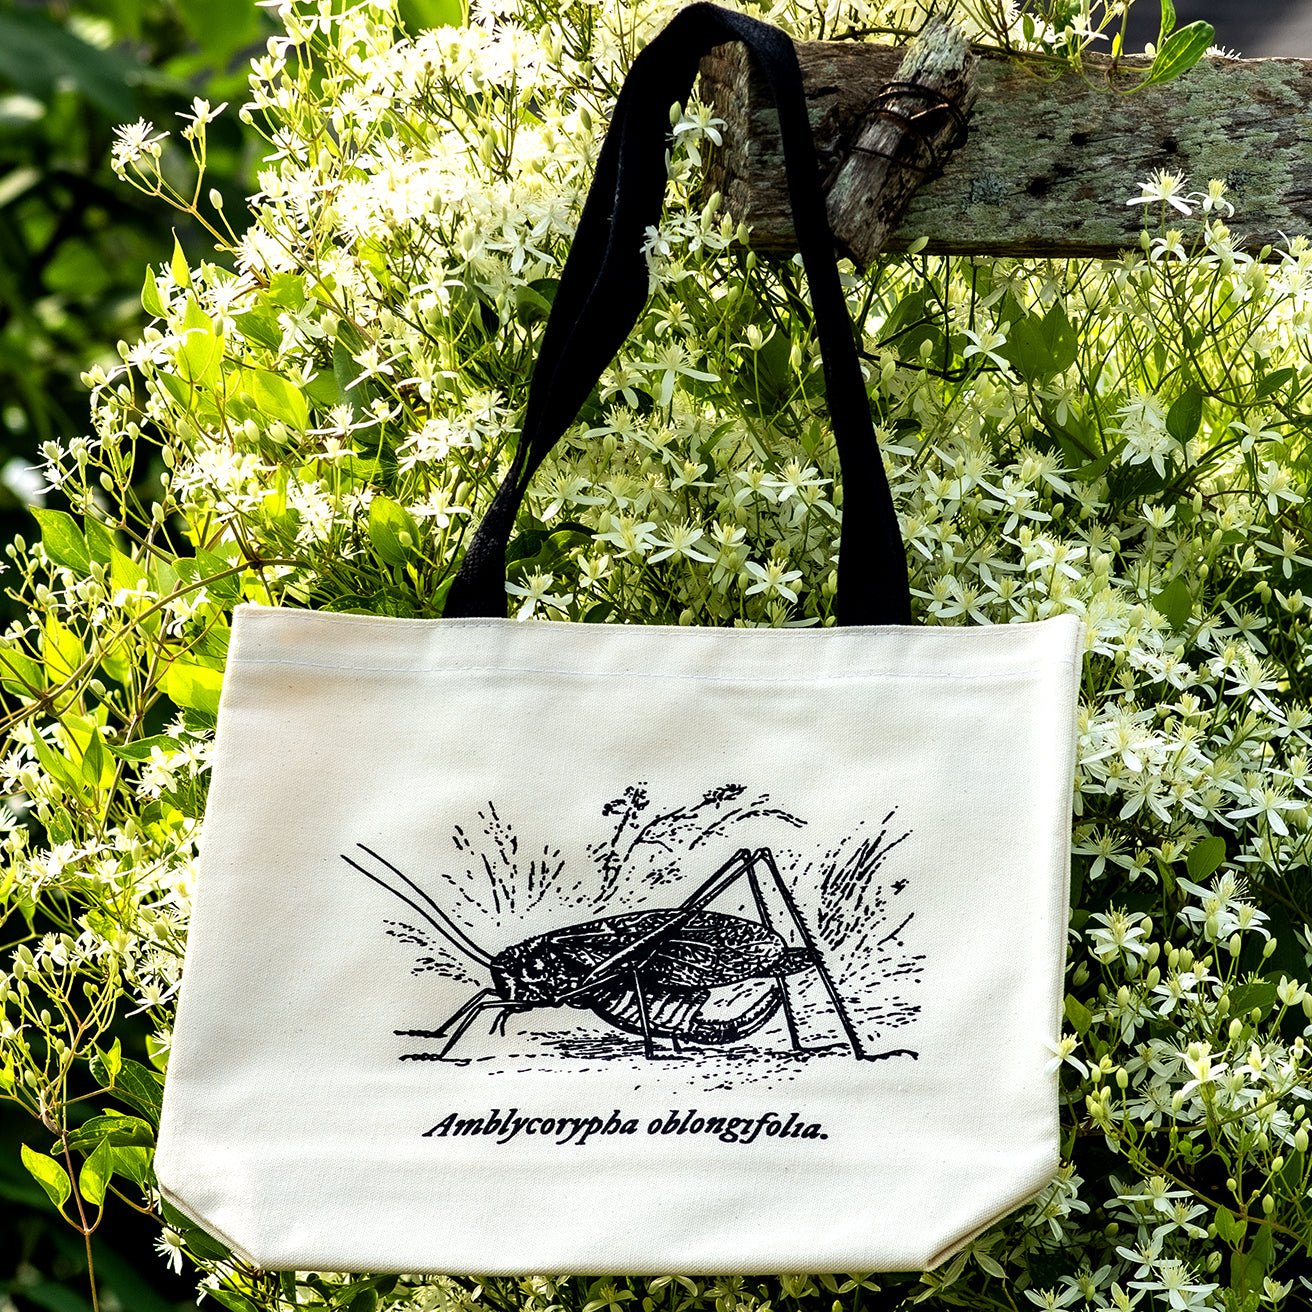 Oblong-winged Katydid Vintage Art Tote by The Roving House